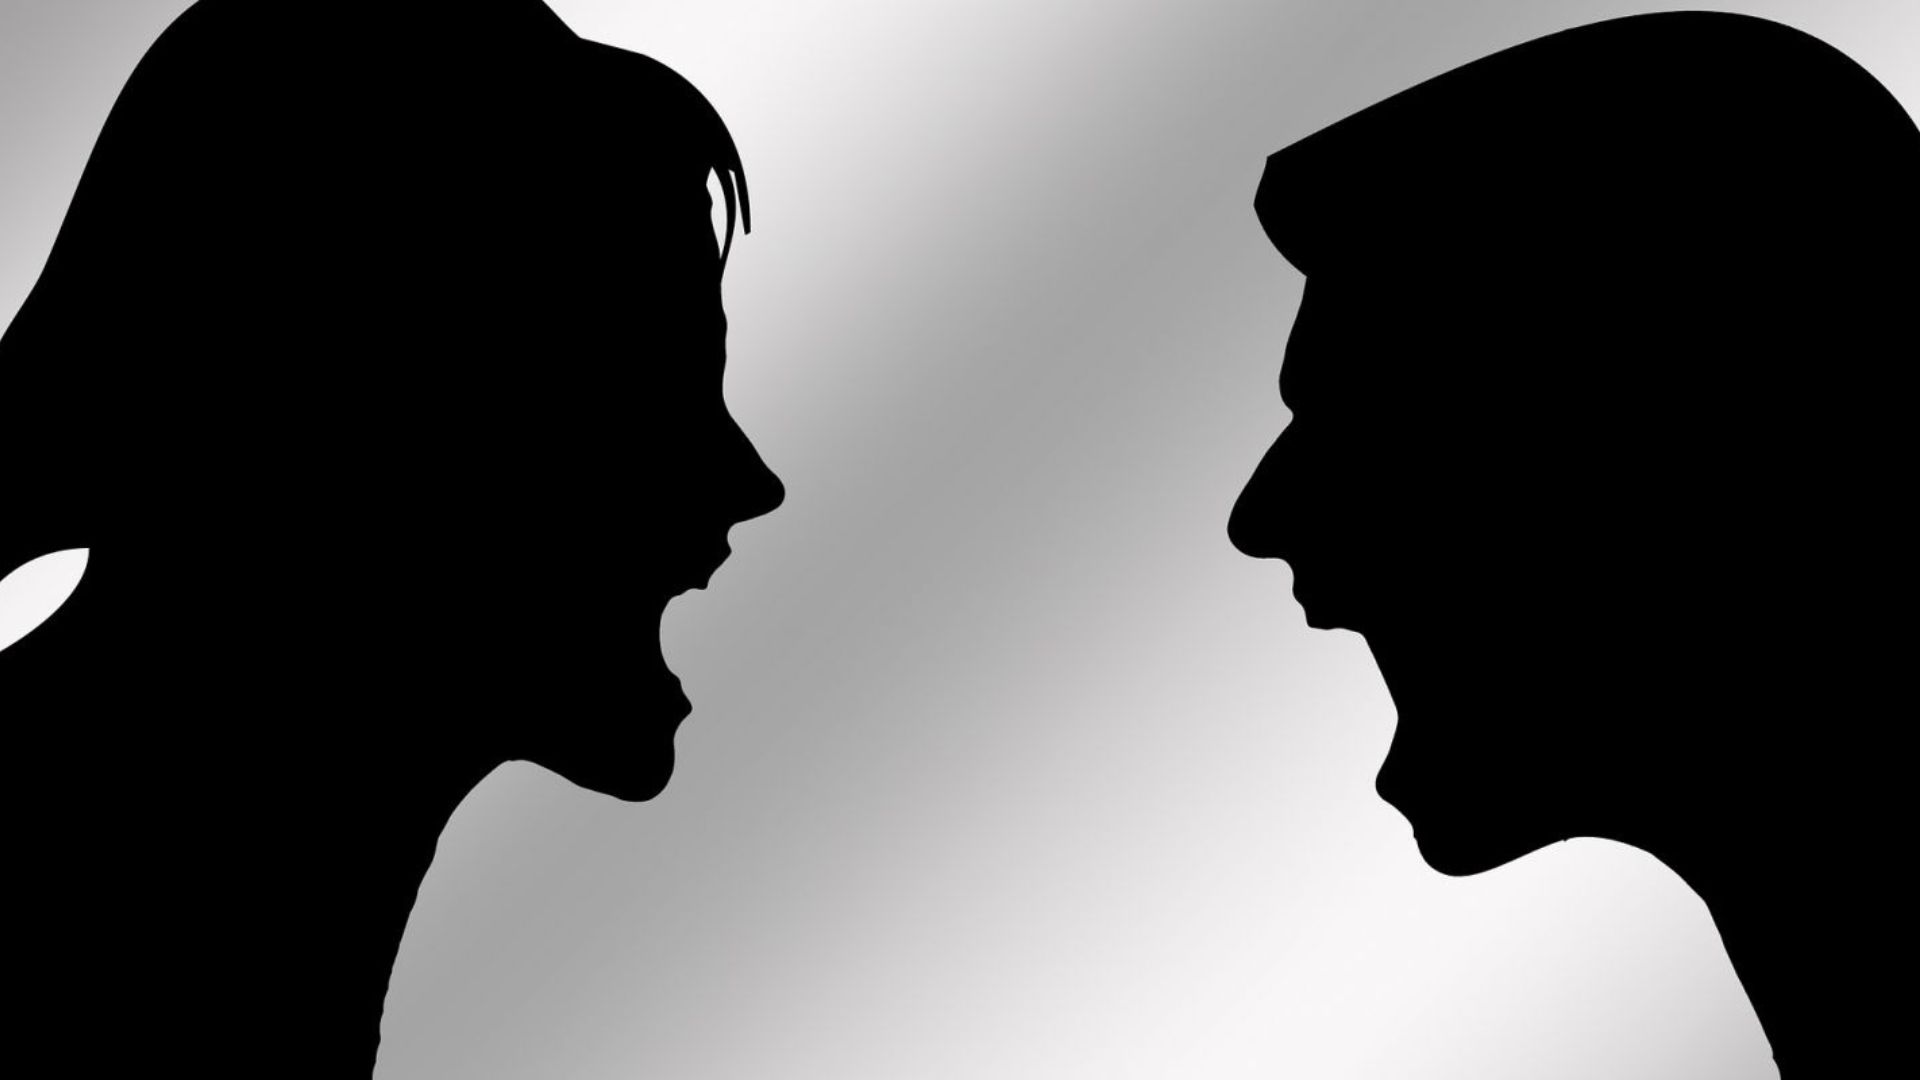 Man And Woman Shouting To Each Other